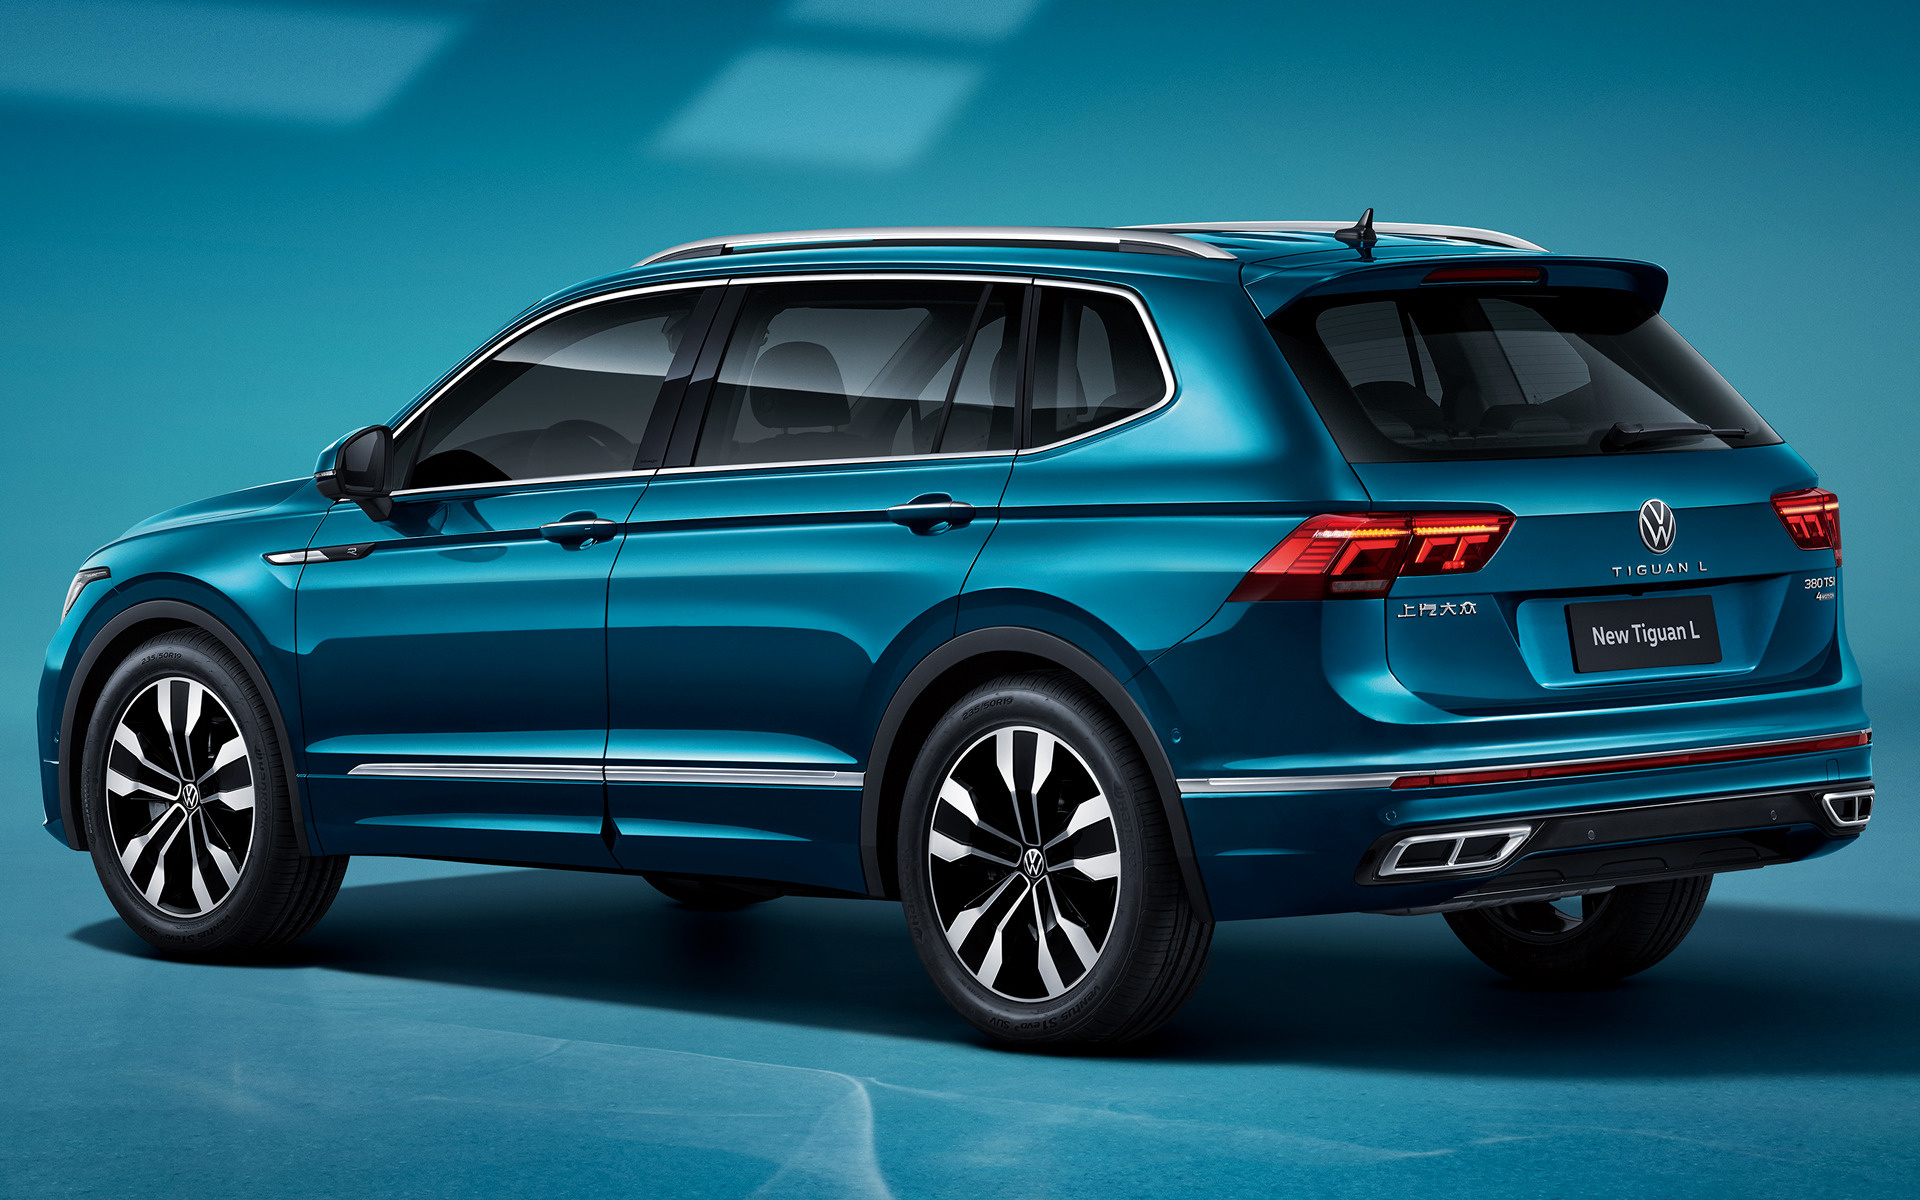 Volkswagen Tiguan l r line, Sporty and versatile, Elegant and refined, Advanced safety features, 1920x1200 HD Desktop